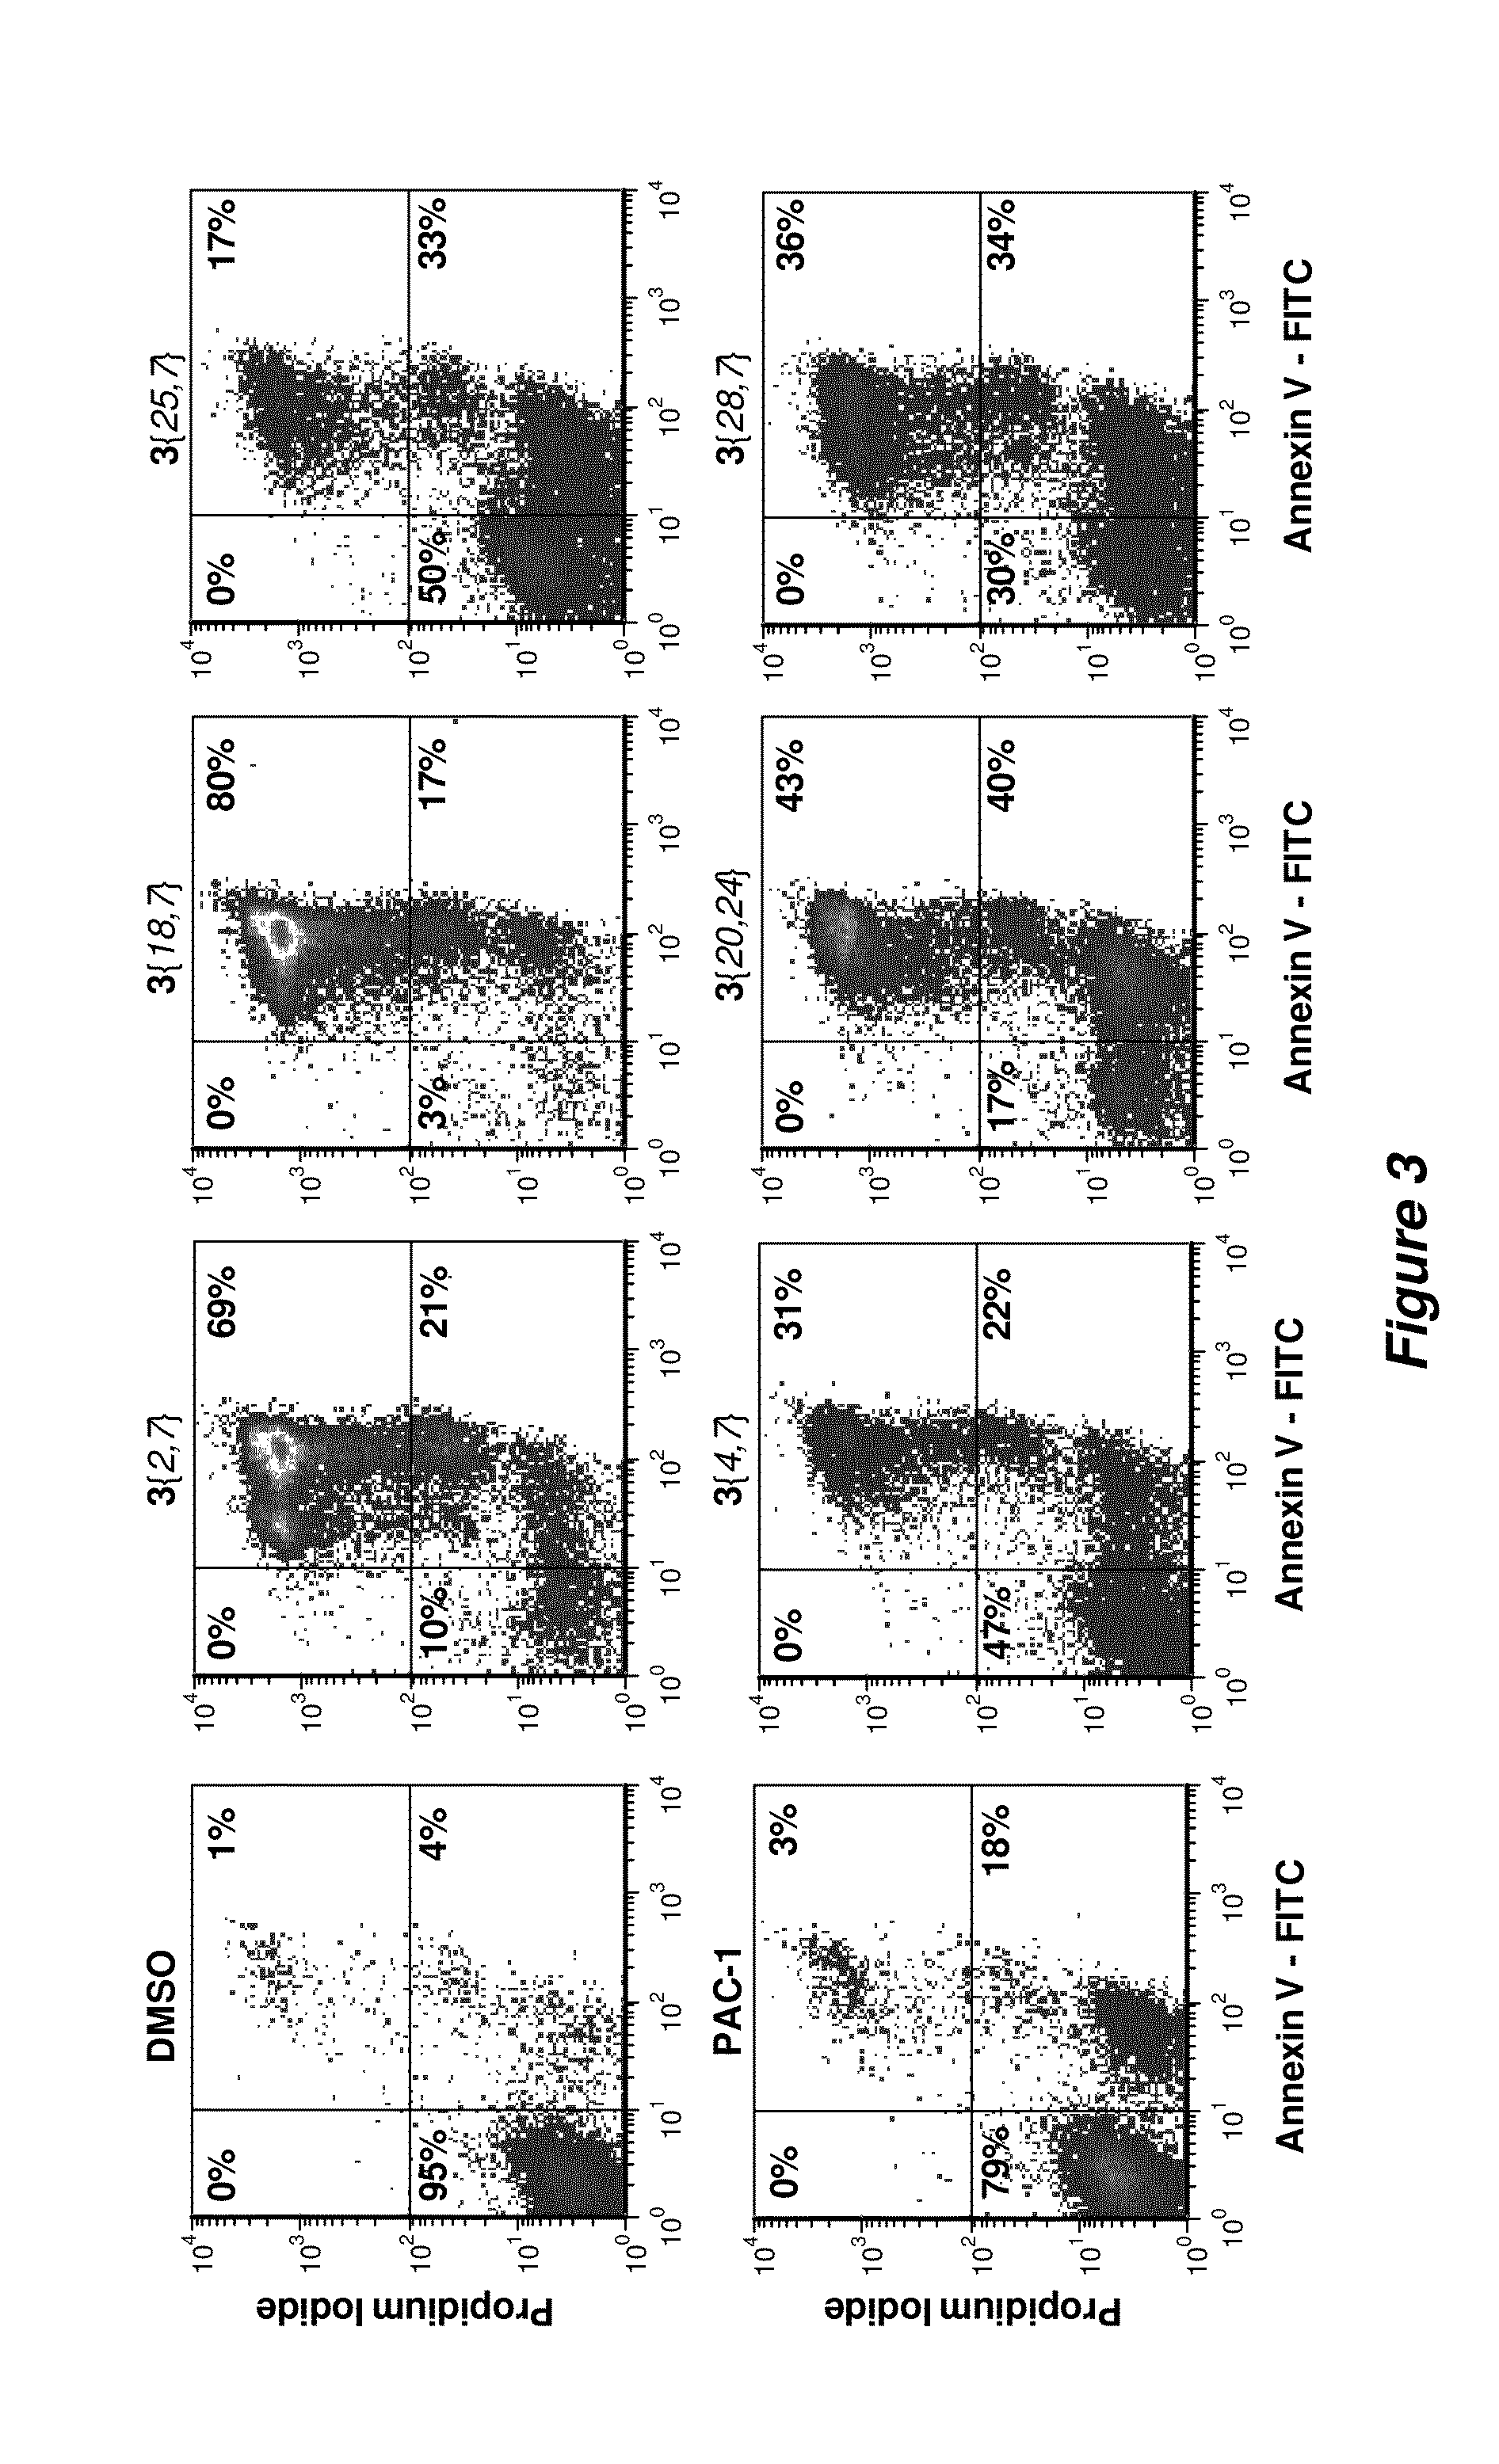 Procaspase-activating compounds and compositions